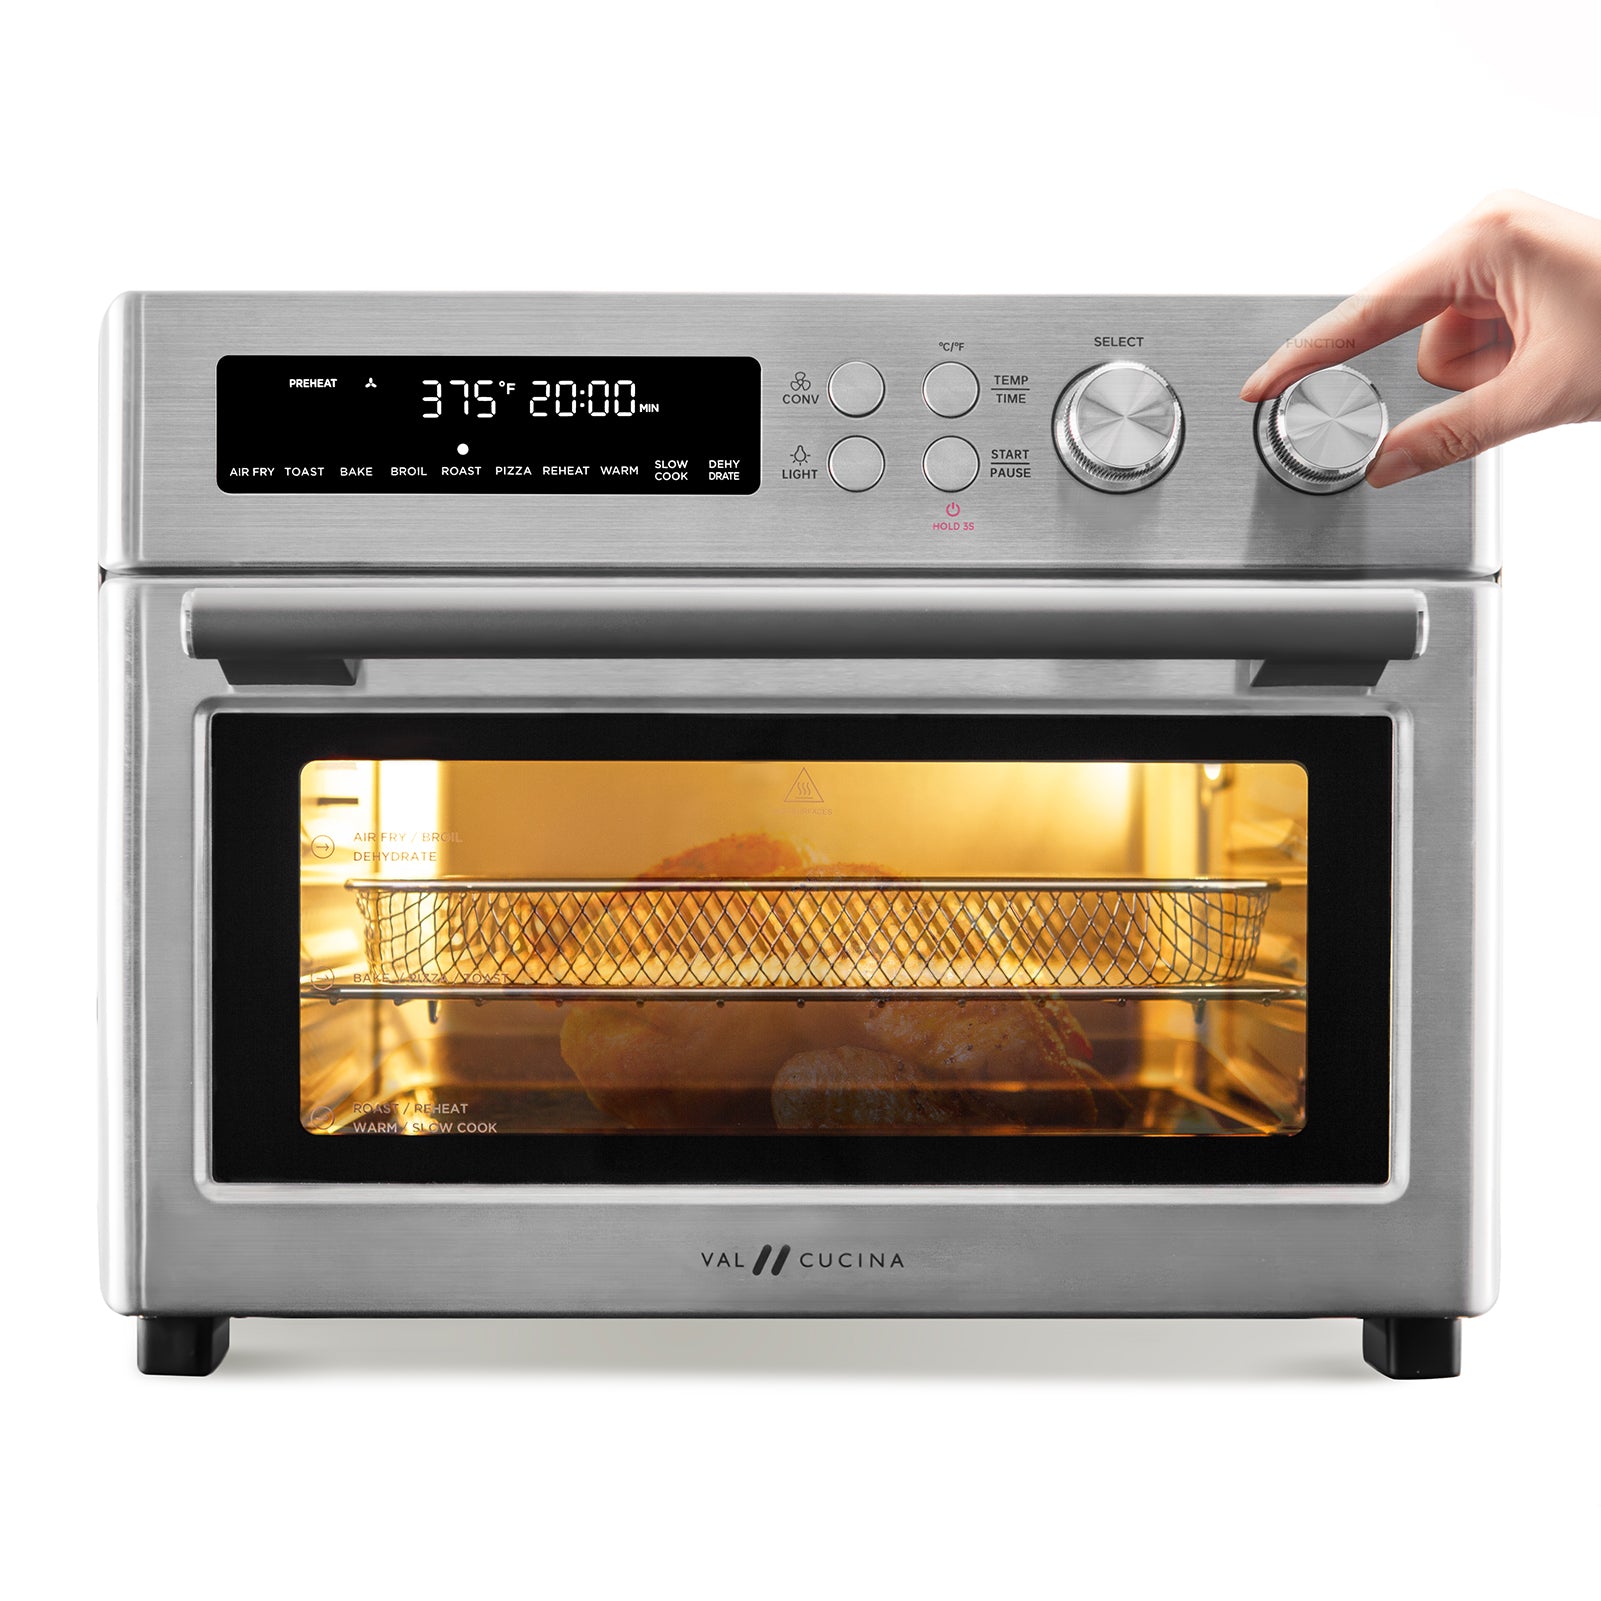 VAL CUCINA 10-in-1 Air Fryer Toaster Oven - Brushed Stainless Steel